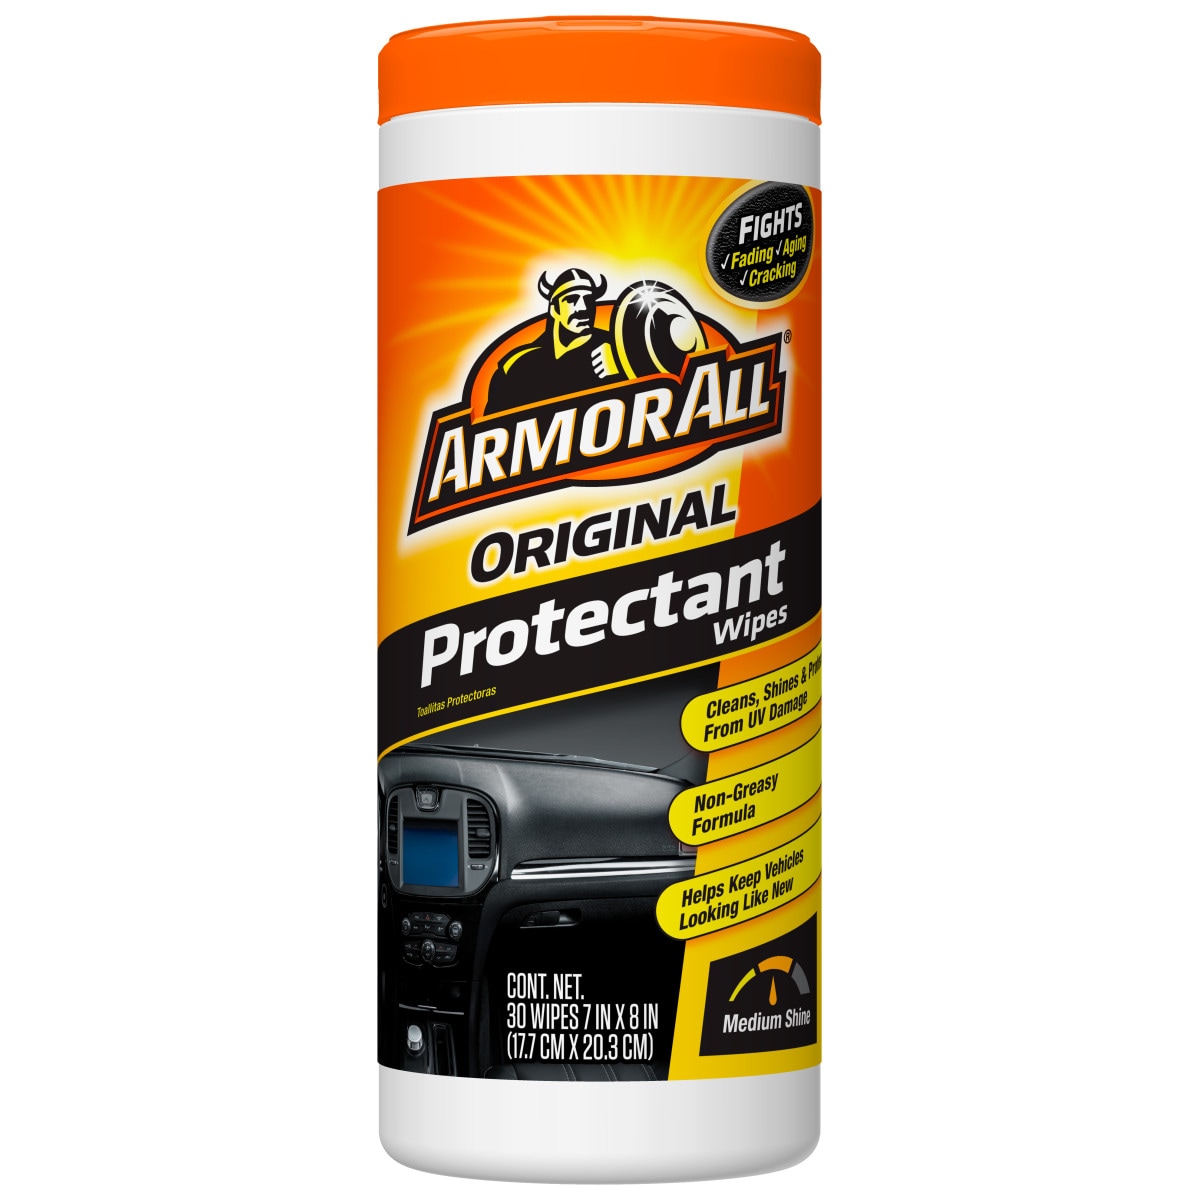 Hand Arnold - The Armor All Complete Car Care Kit delivers 4